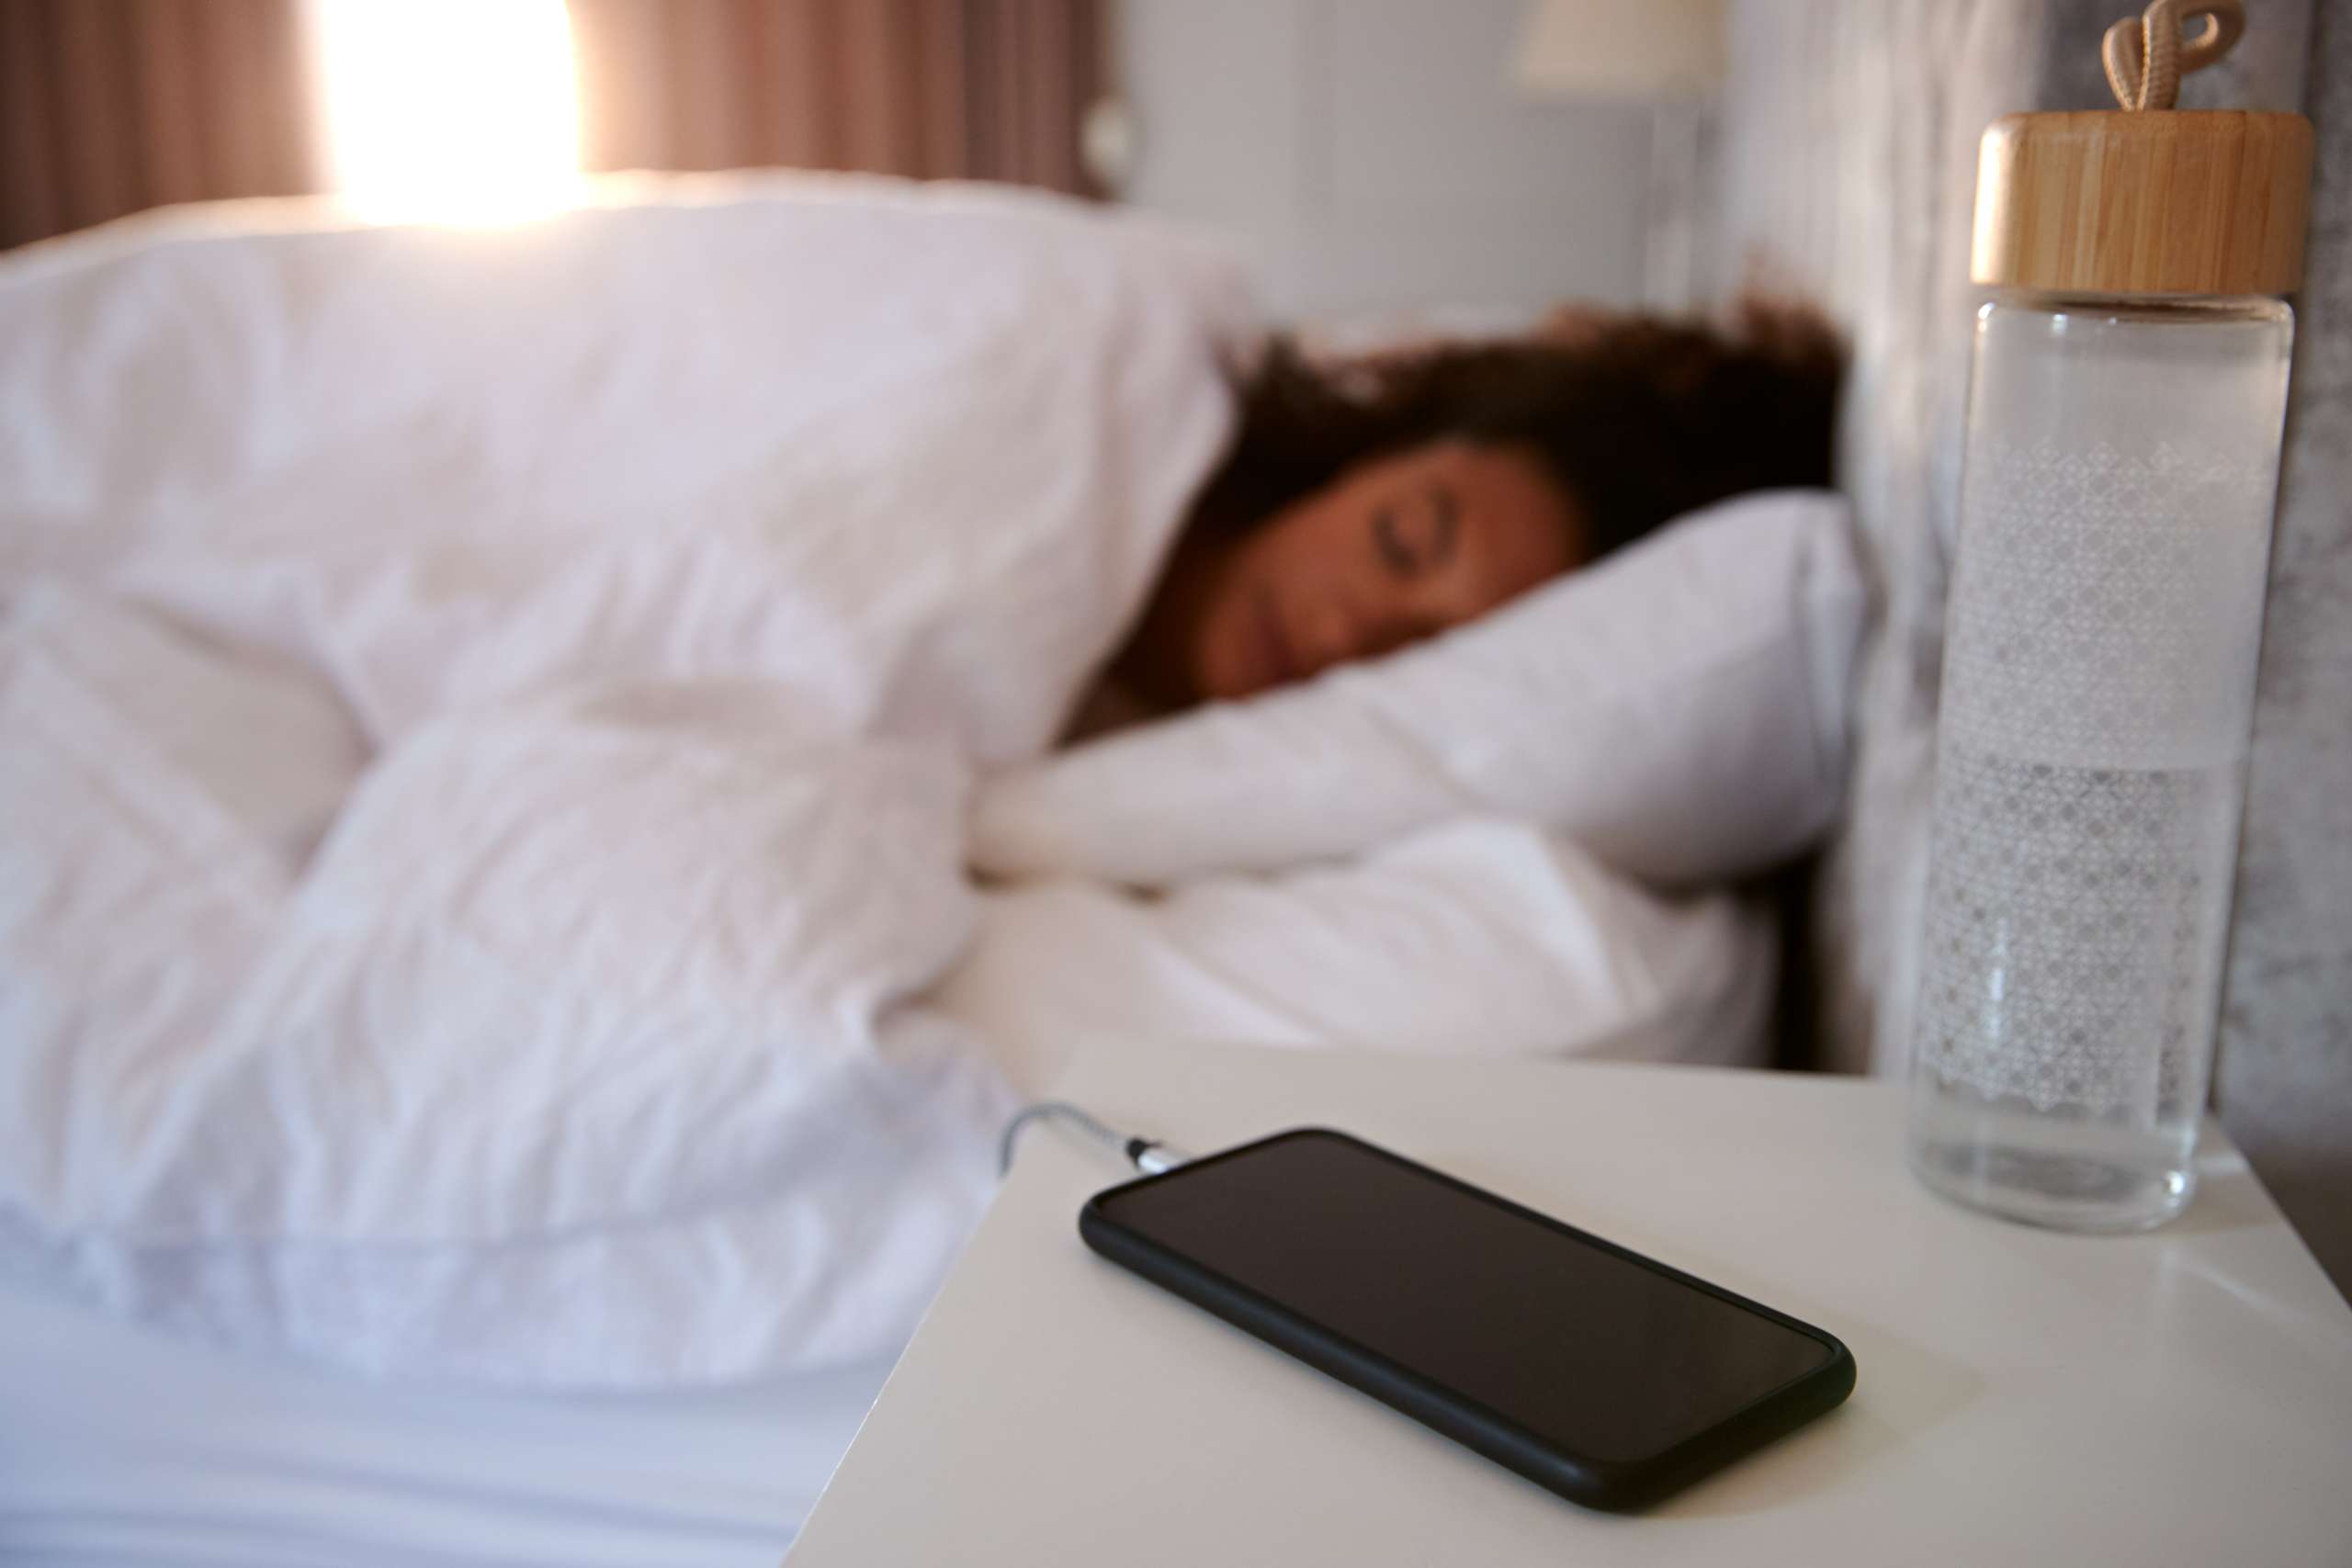 Woman Asleep In Bed With Mobile Phone On Bedside Table